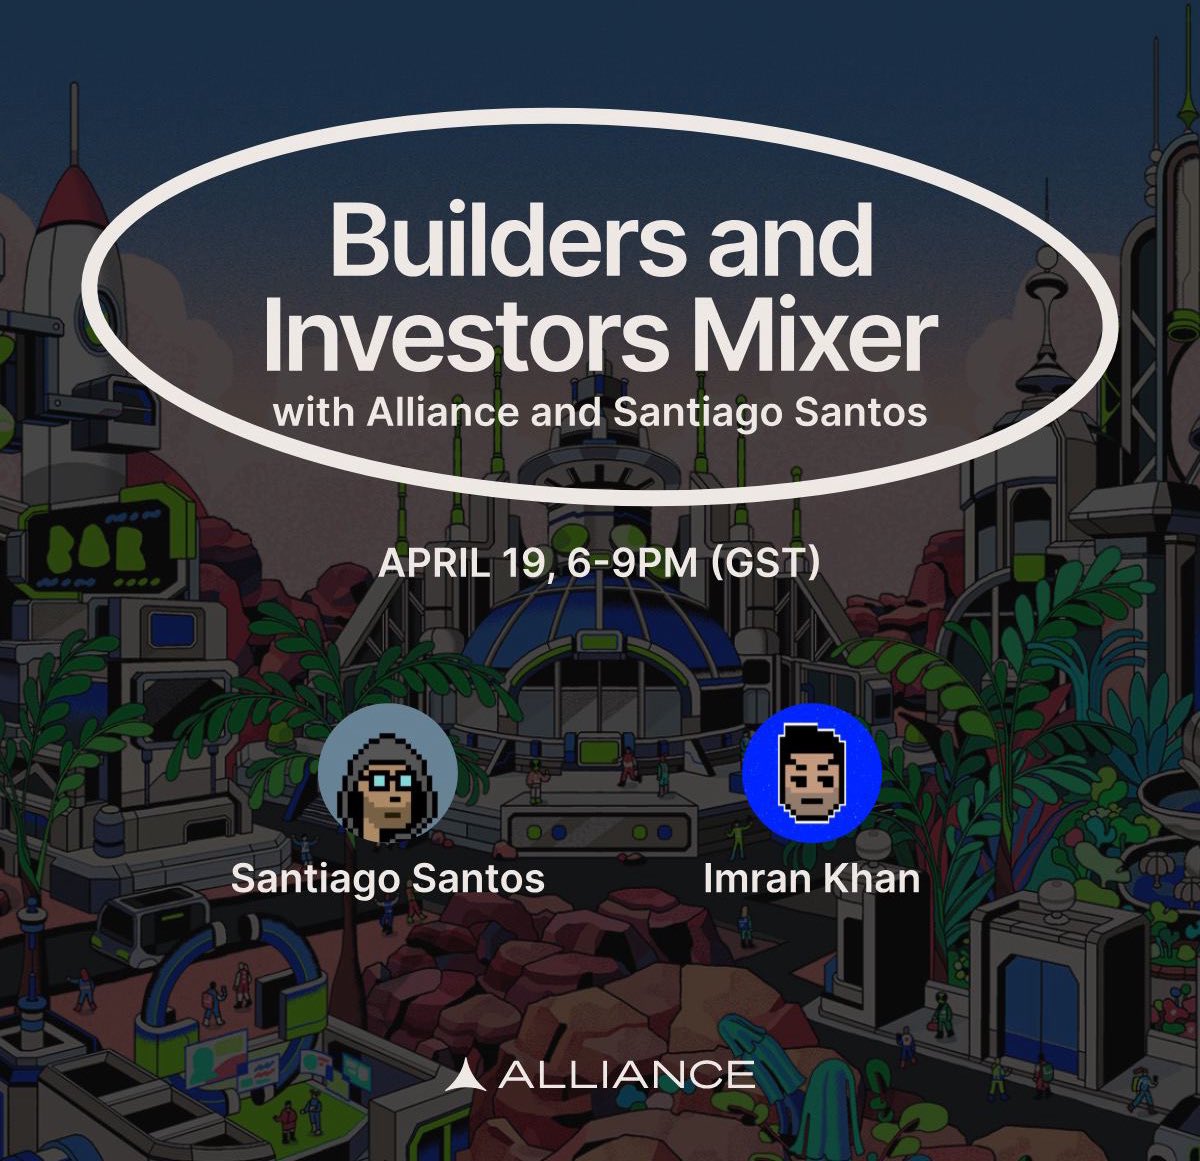 I am hosting an intimate founders/investors mixer with @santiagoroel @ Token2049 Dubai Apply if you’re a founder / investor in the space. lu.ma/6omx9mww